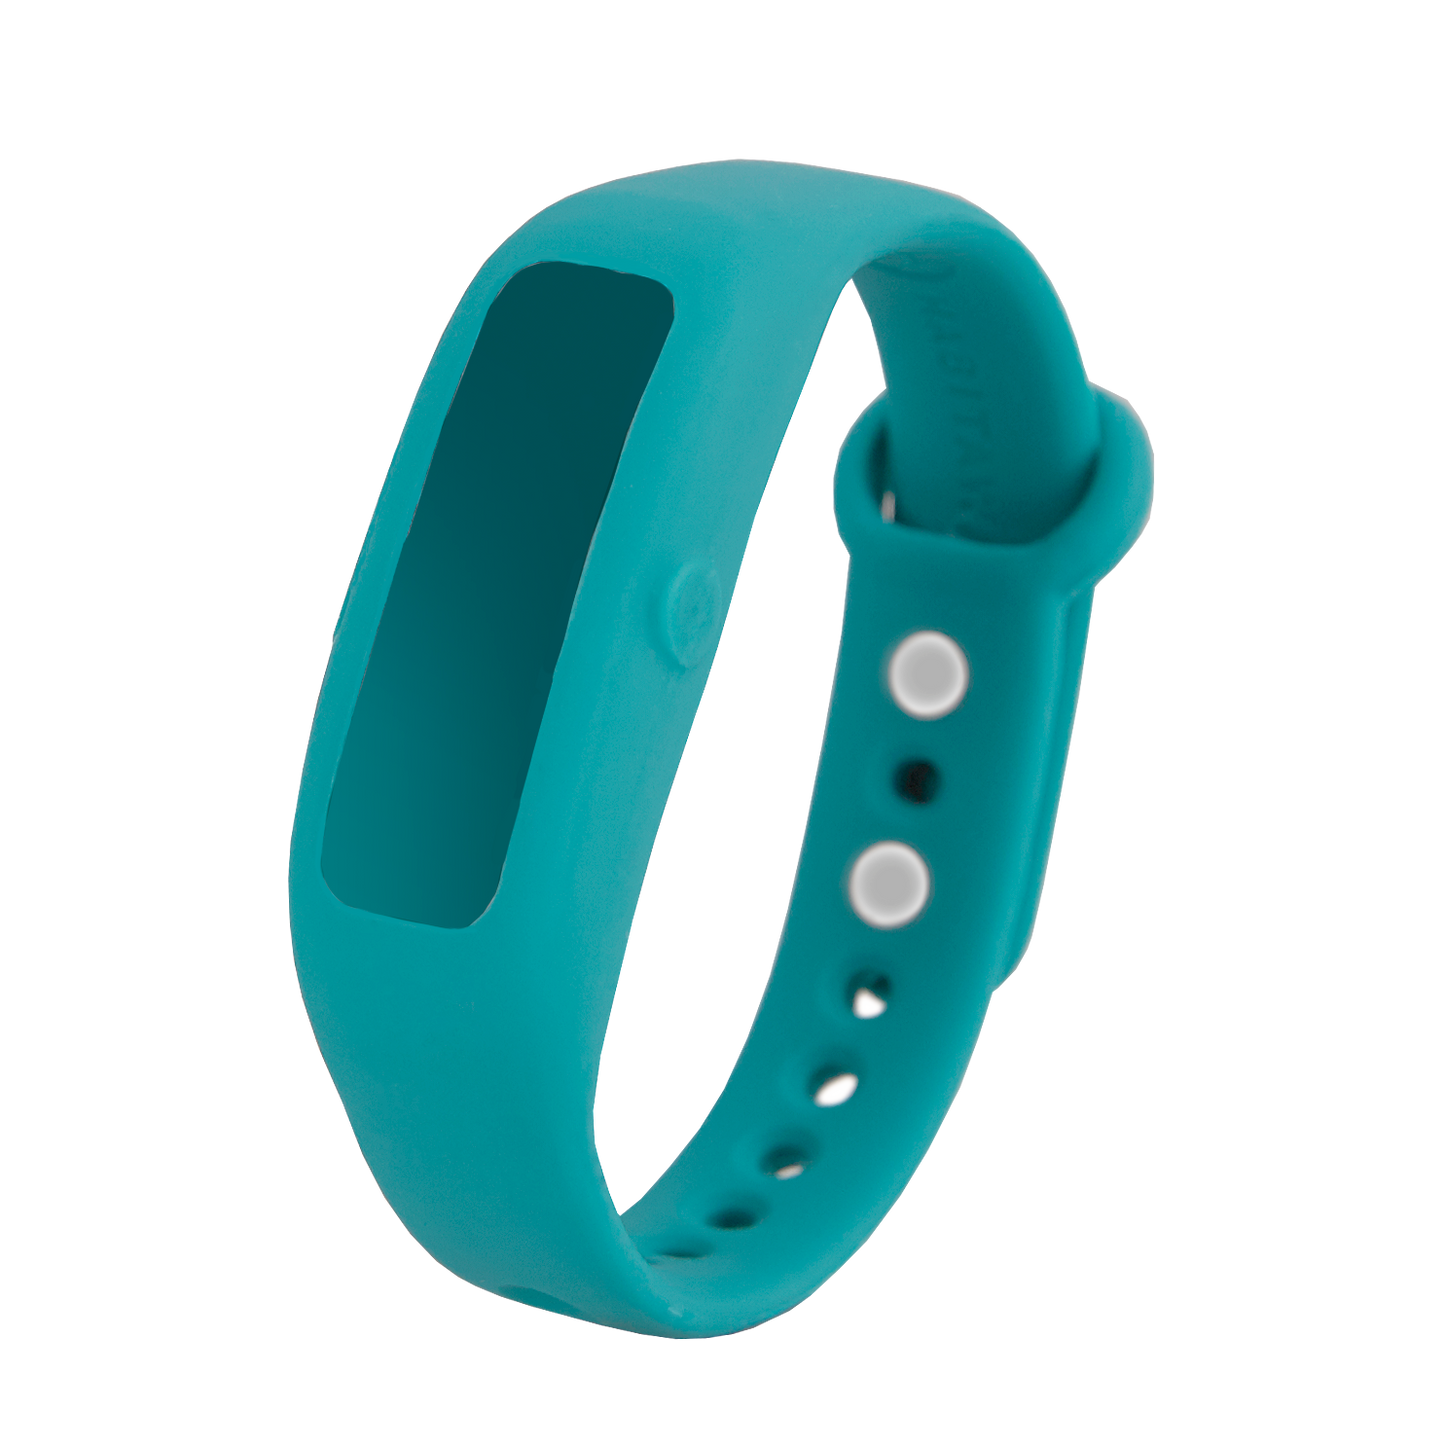 A Sporty Keen - Teal Strap fitness tracker with a button on the side.